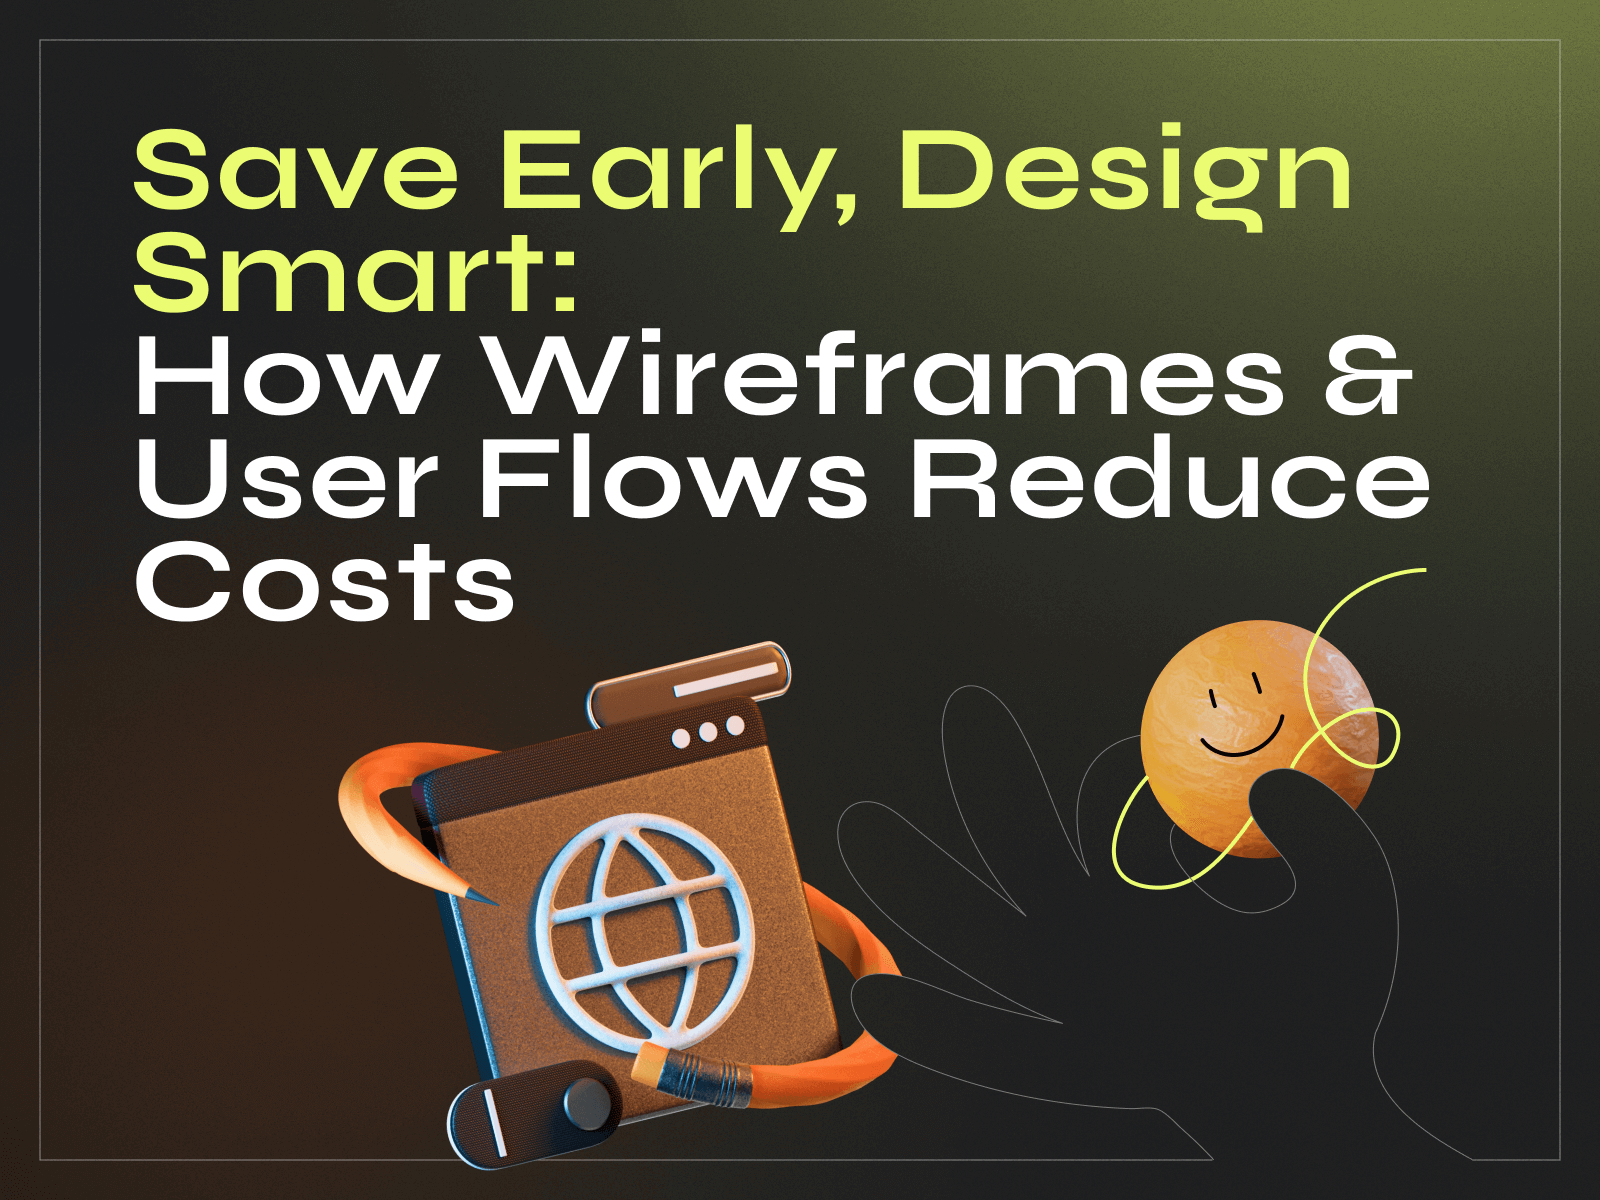 Save Early, Design Smart: How Wireframes & User Flows Reduce Costs - Photo 0